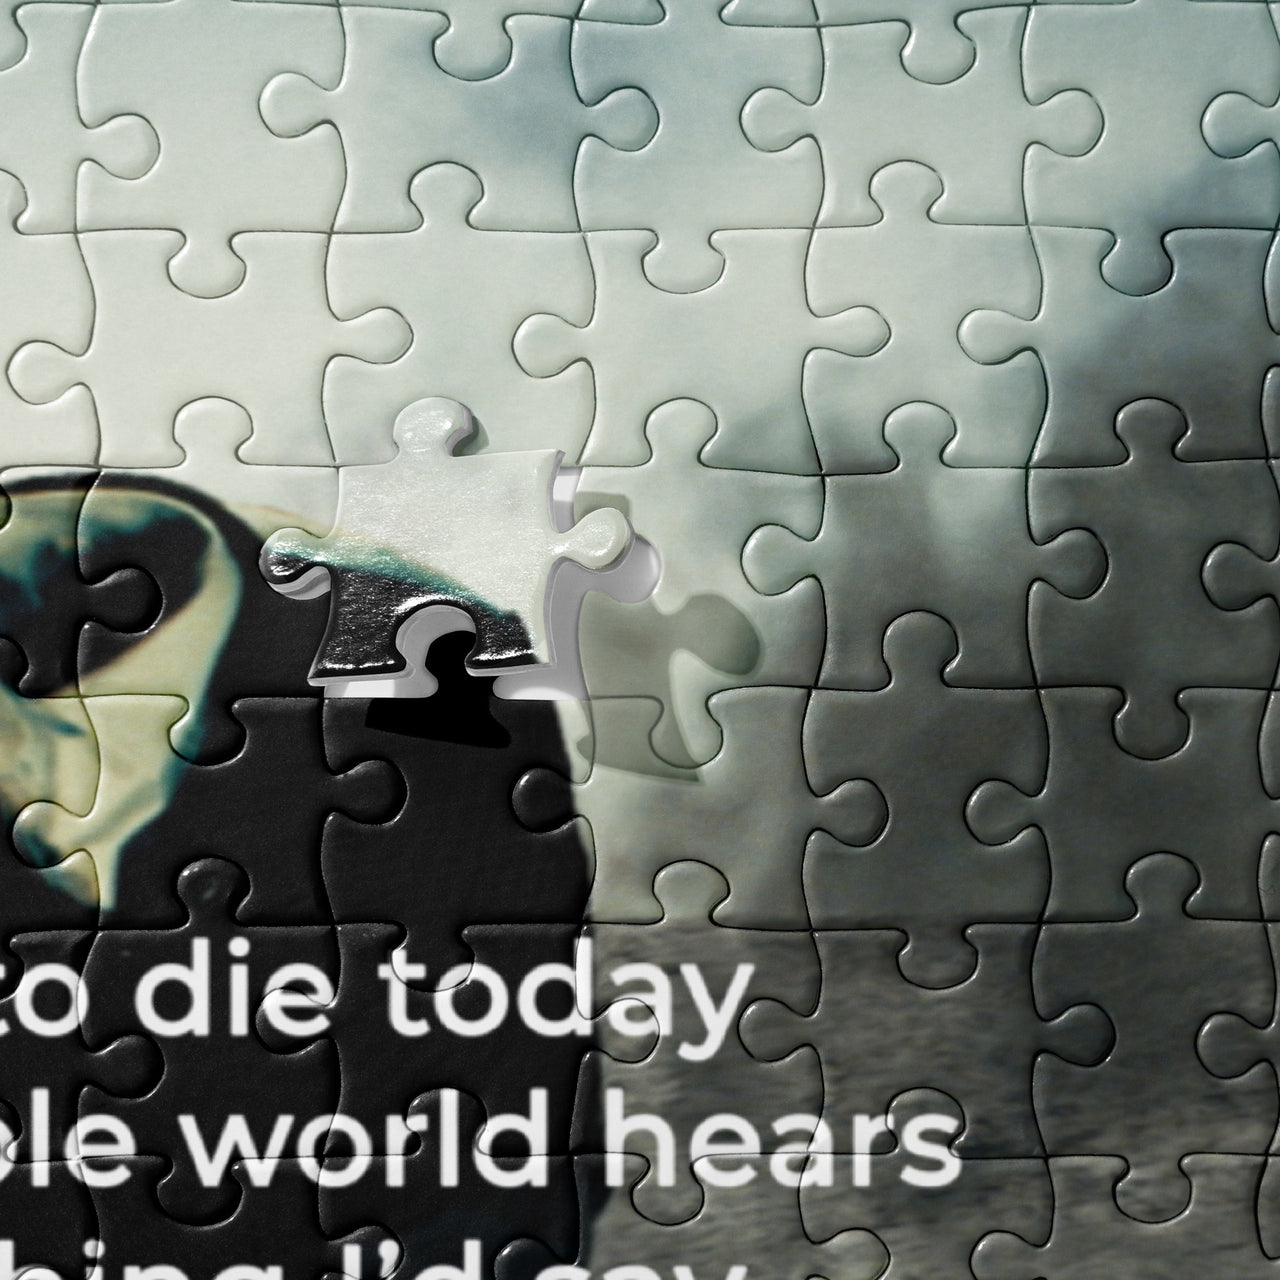 Poetry On A Jigsaw Puzzle "If I Were To Die Today" Poem by David In Donihue